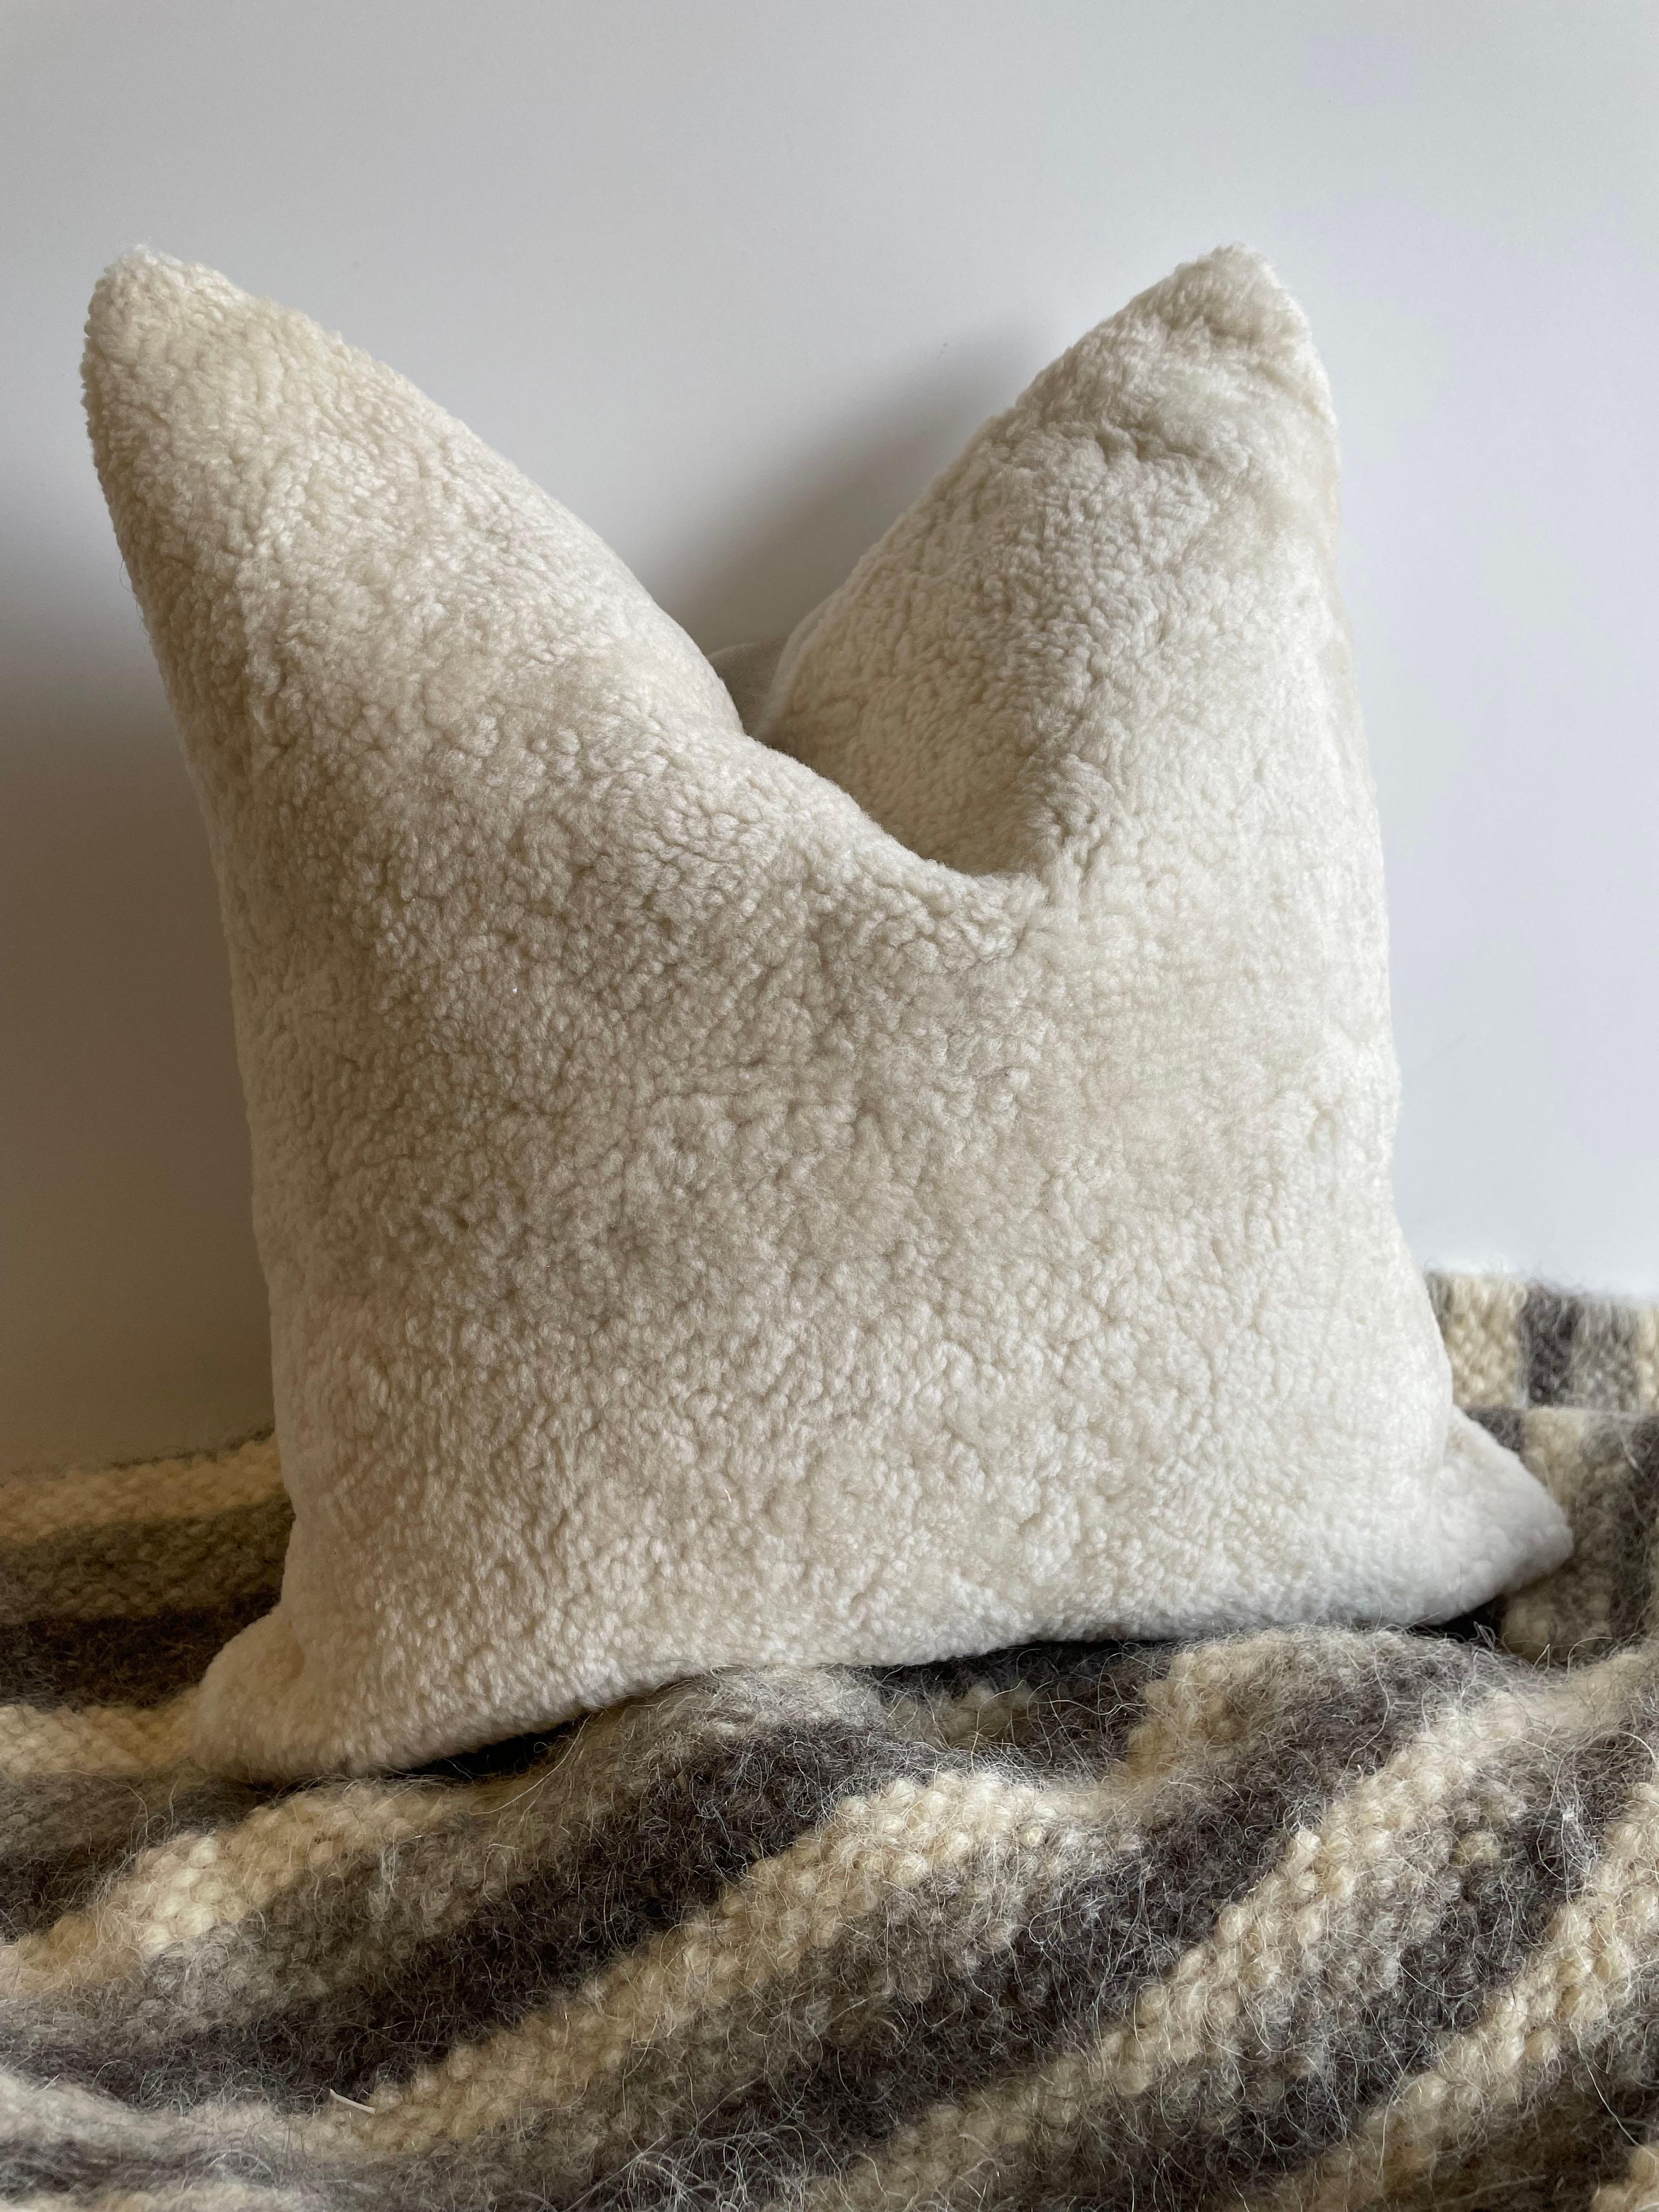 Luxurious Sheep Skin Wool Pillow
Face features a curly natural (light oatmeal) real sheep skin
Back is in oyster linen. Overlocked edges and brass zipper closure.
Size 19